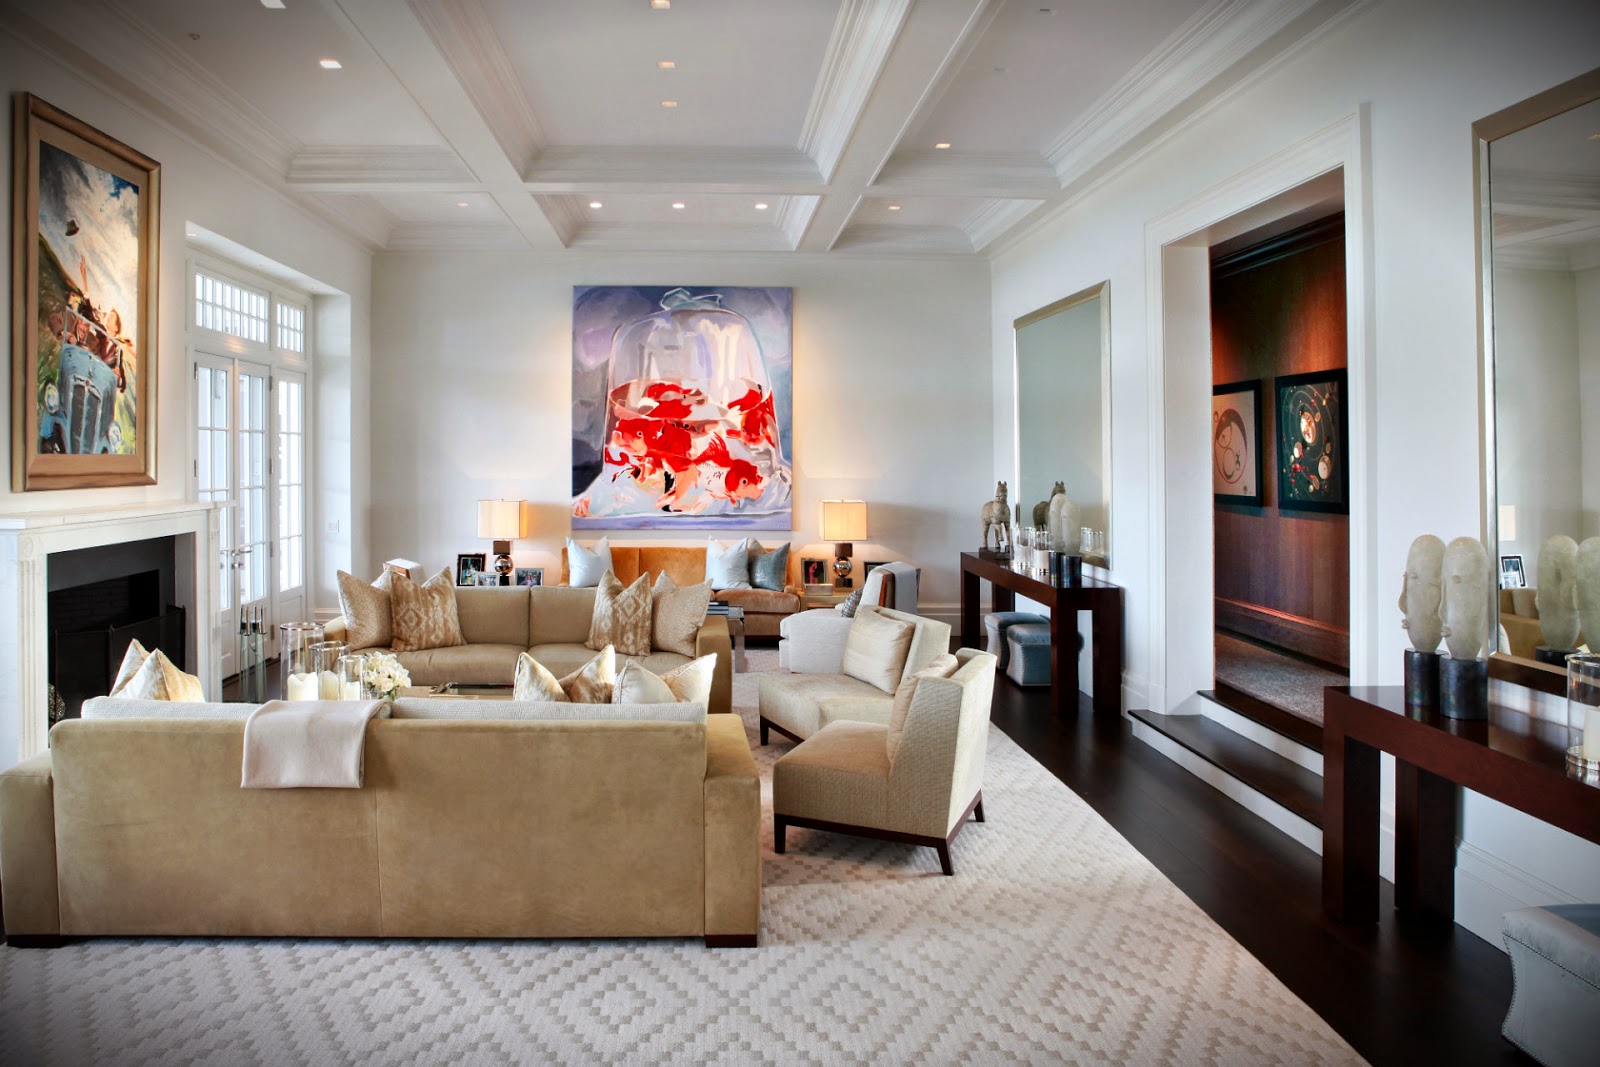 A living room with a large painting on the wall exudes refined luxury.